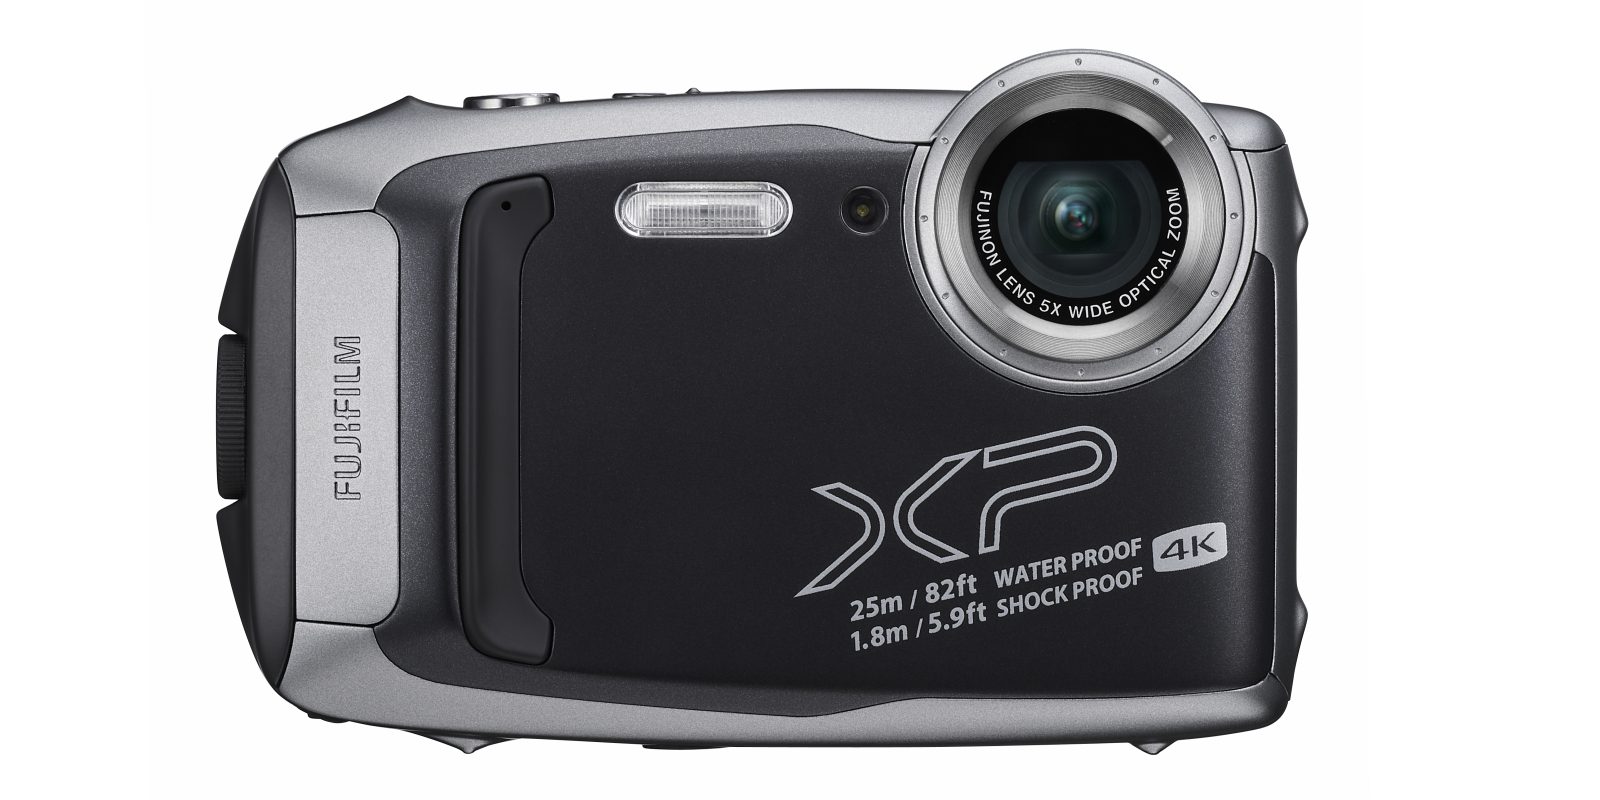 Fujifilm FinePix XP140: 4K Action camera with waterproofing - 9to5Toys